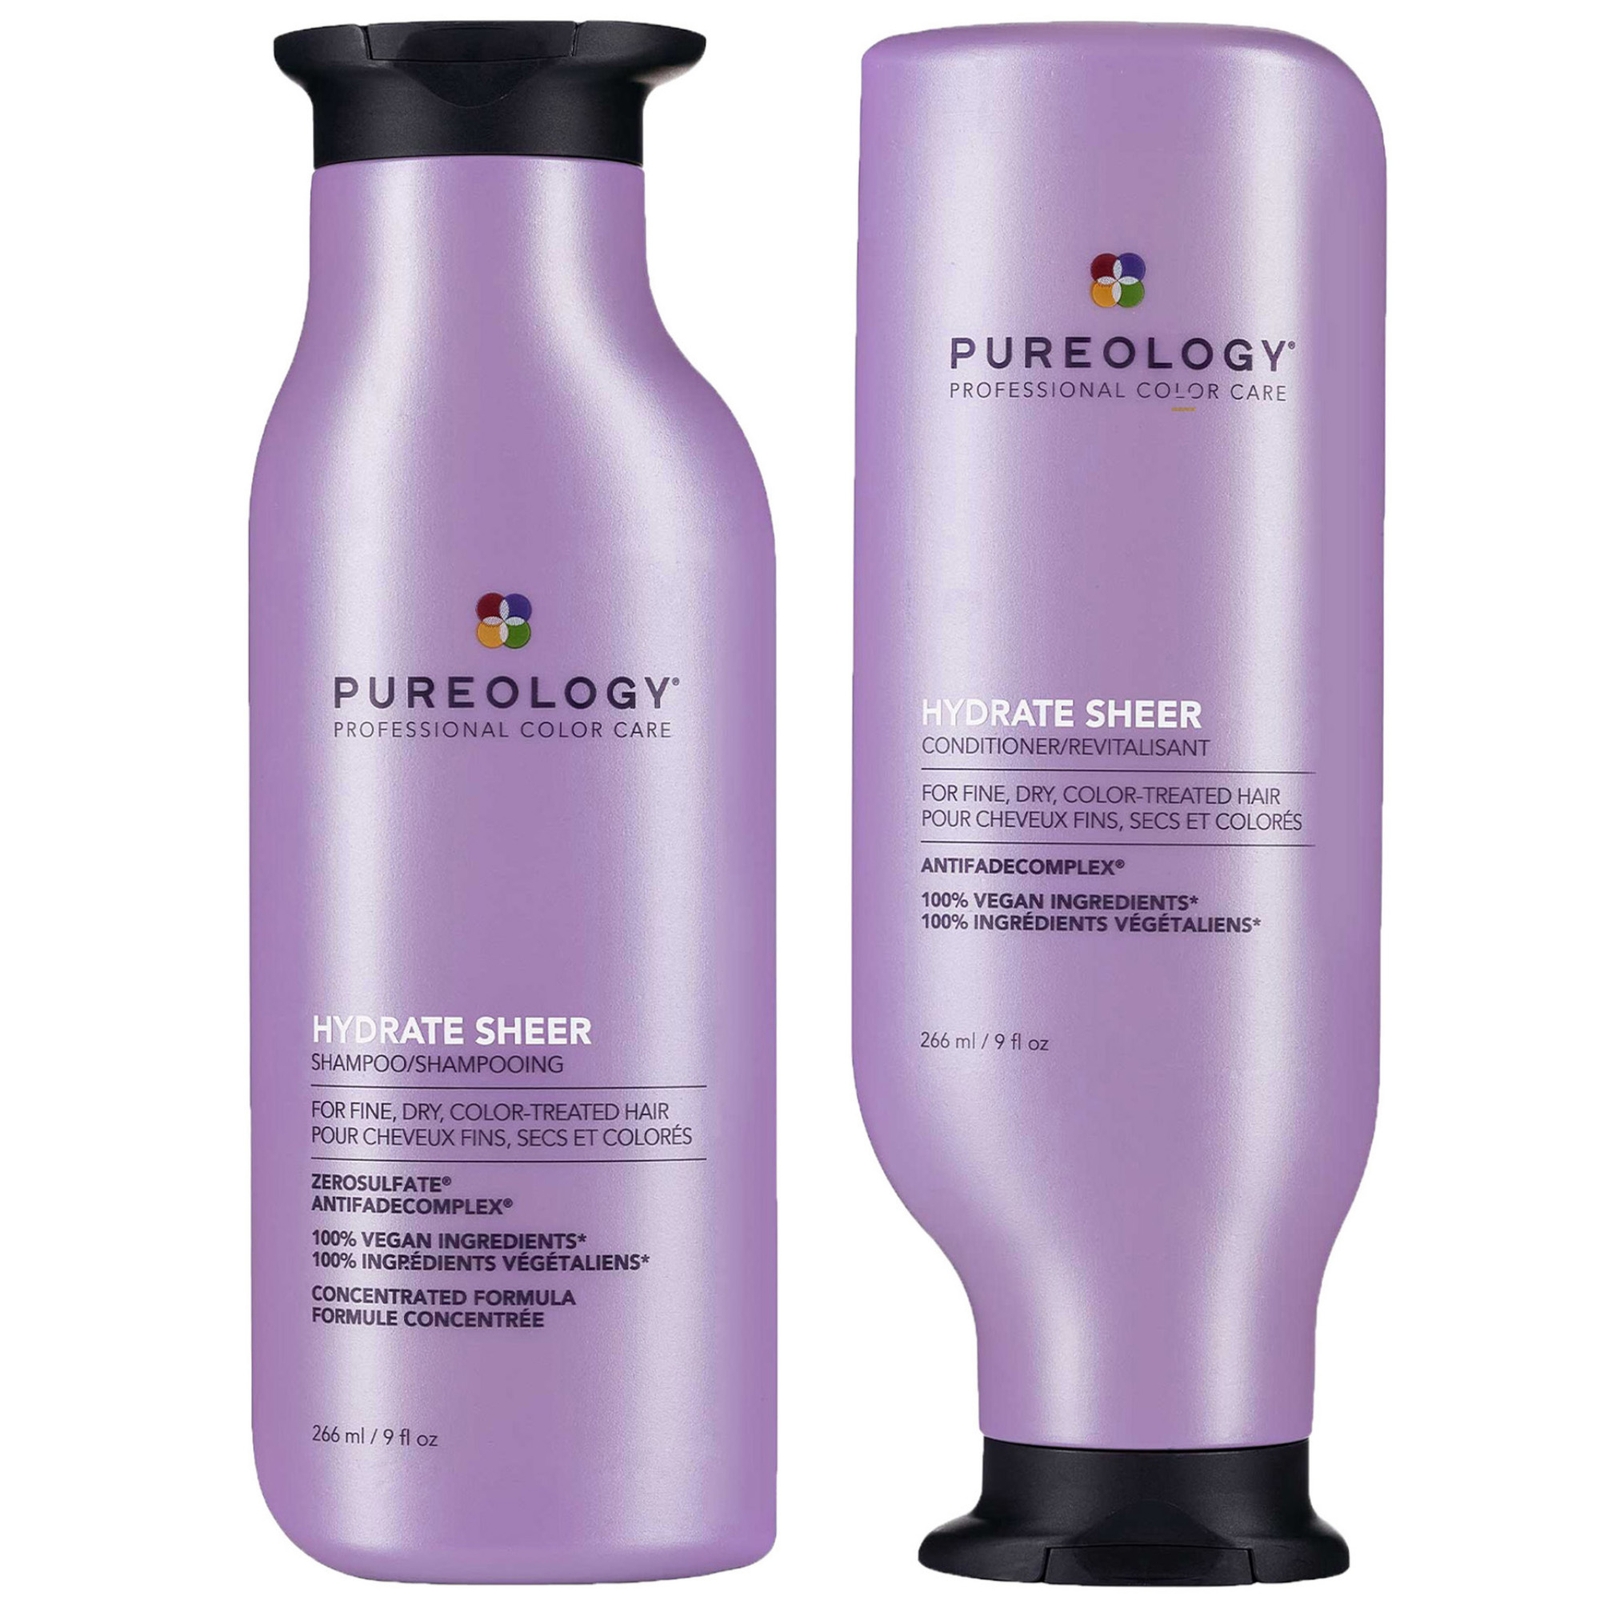 Pureology Hydrate Sheer Shampoo and Conditioner Bundle for Fine, Dry Hair, Sulphate Free for a Gentl